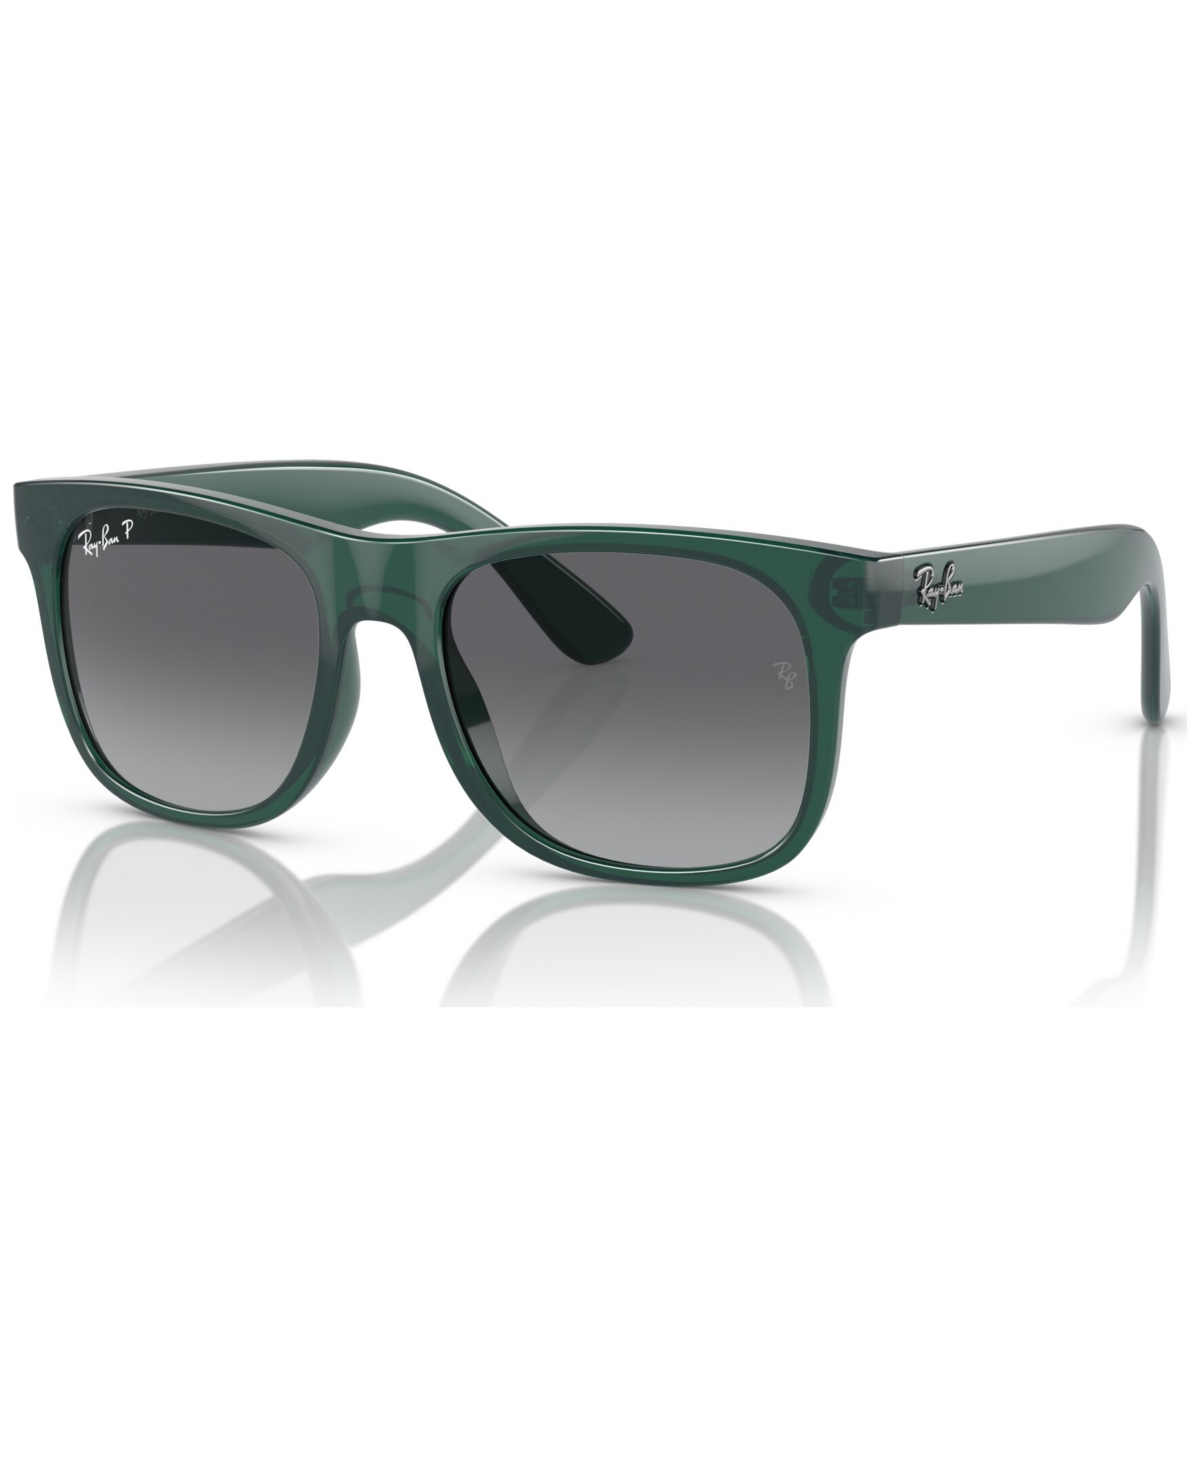 Ray-ban Jr Kids Polarized Sunglasses, Justin (ages 11-13) In Opal Green